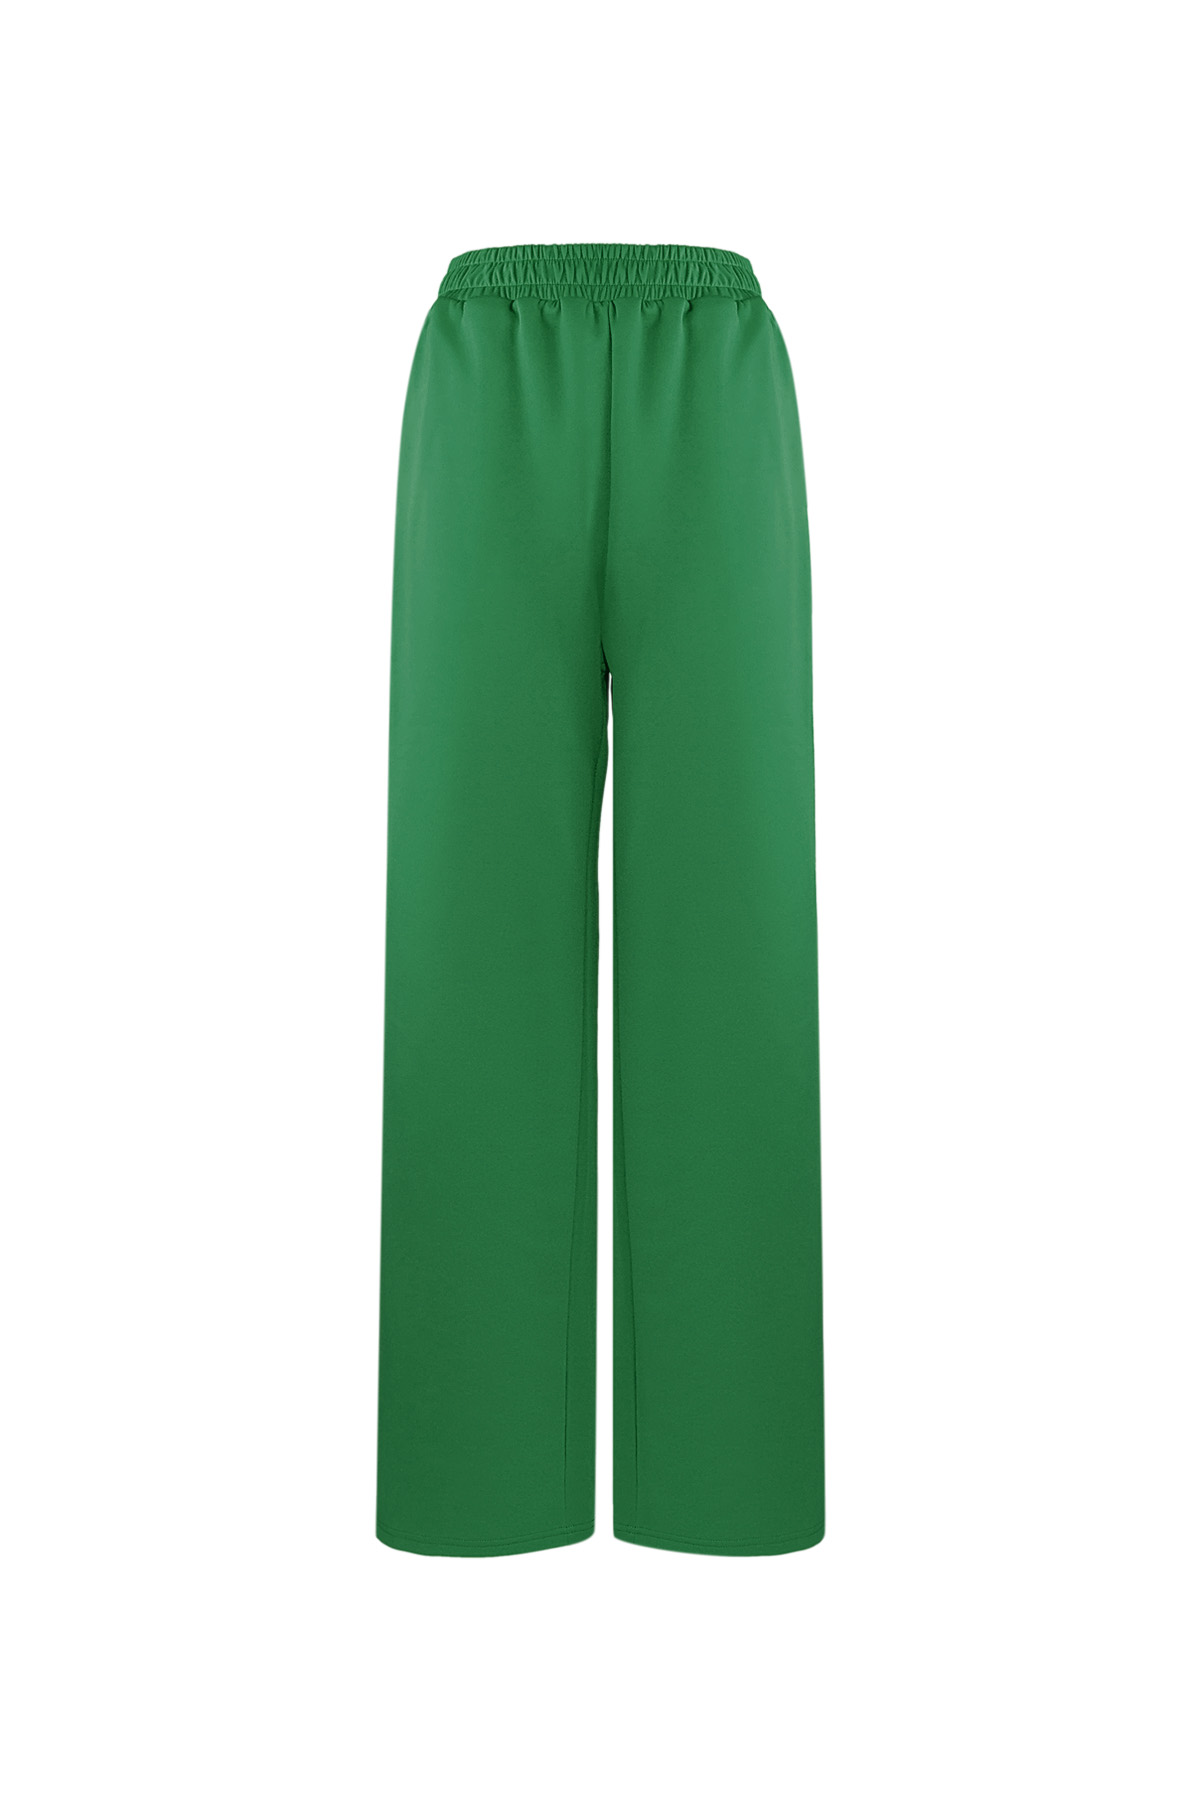 Striped must have pants - green S 